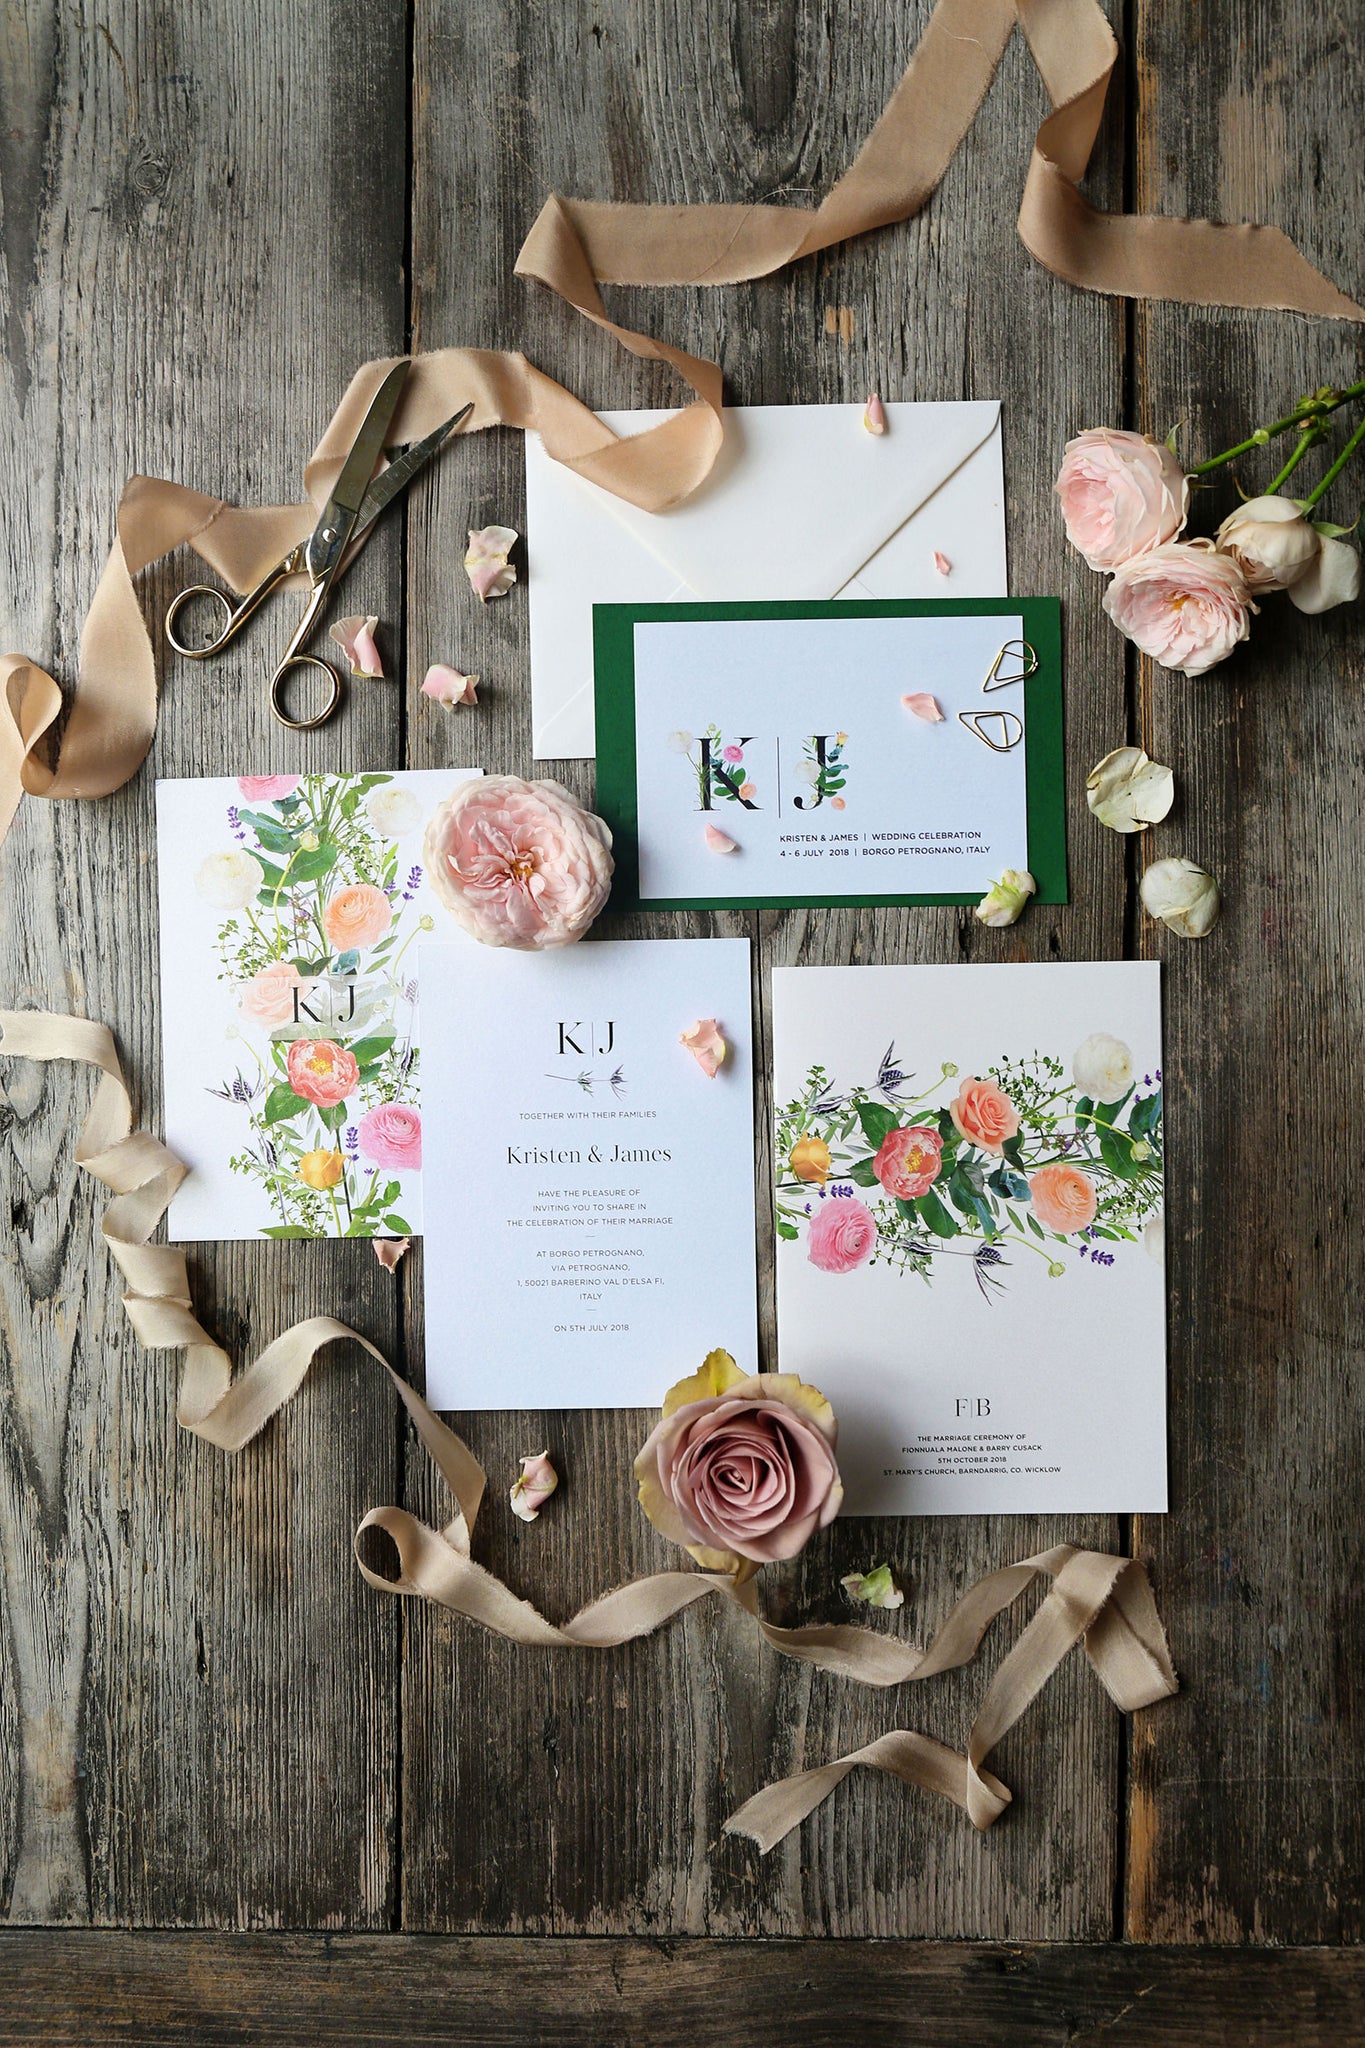 Bloom No. 2 wedding invite design by Marley Press uses clippings of real summer flowers heads in pinks and peach covering the back of the invite arranged in an informal manner on a bed of herbs and eucalyptus leaves. The text is keep simple on the reverse